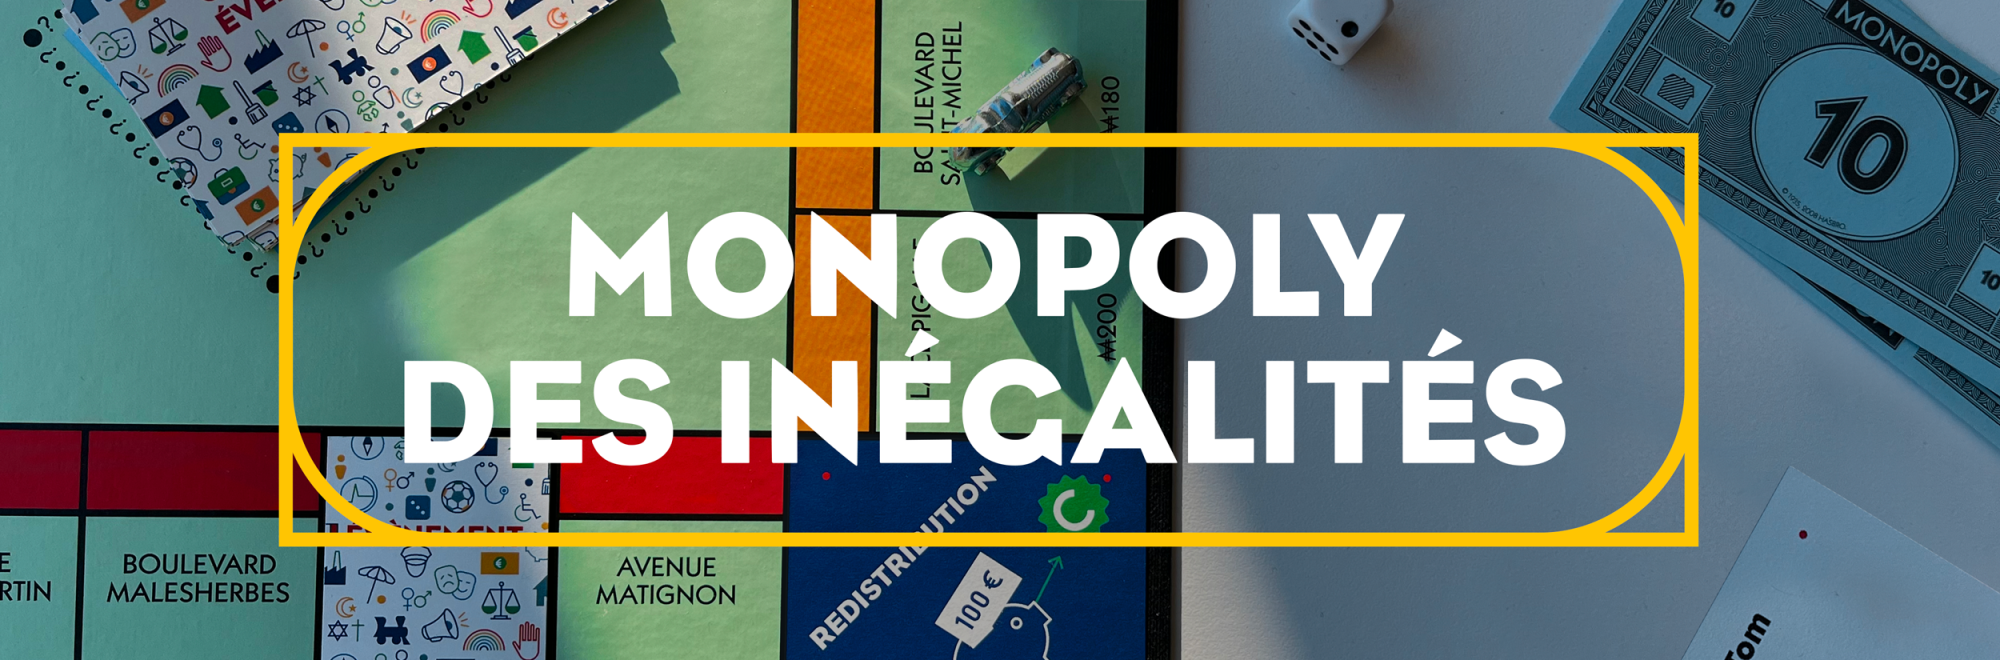 French creative agency changes the rules of Monopoly to reflect real-life injustices in society